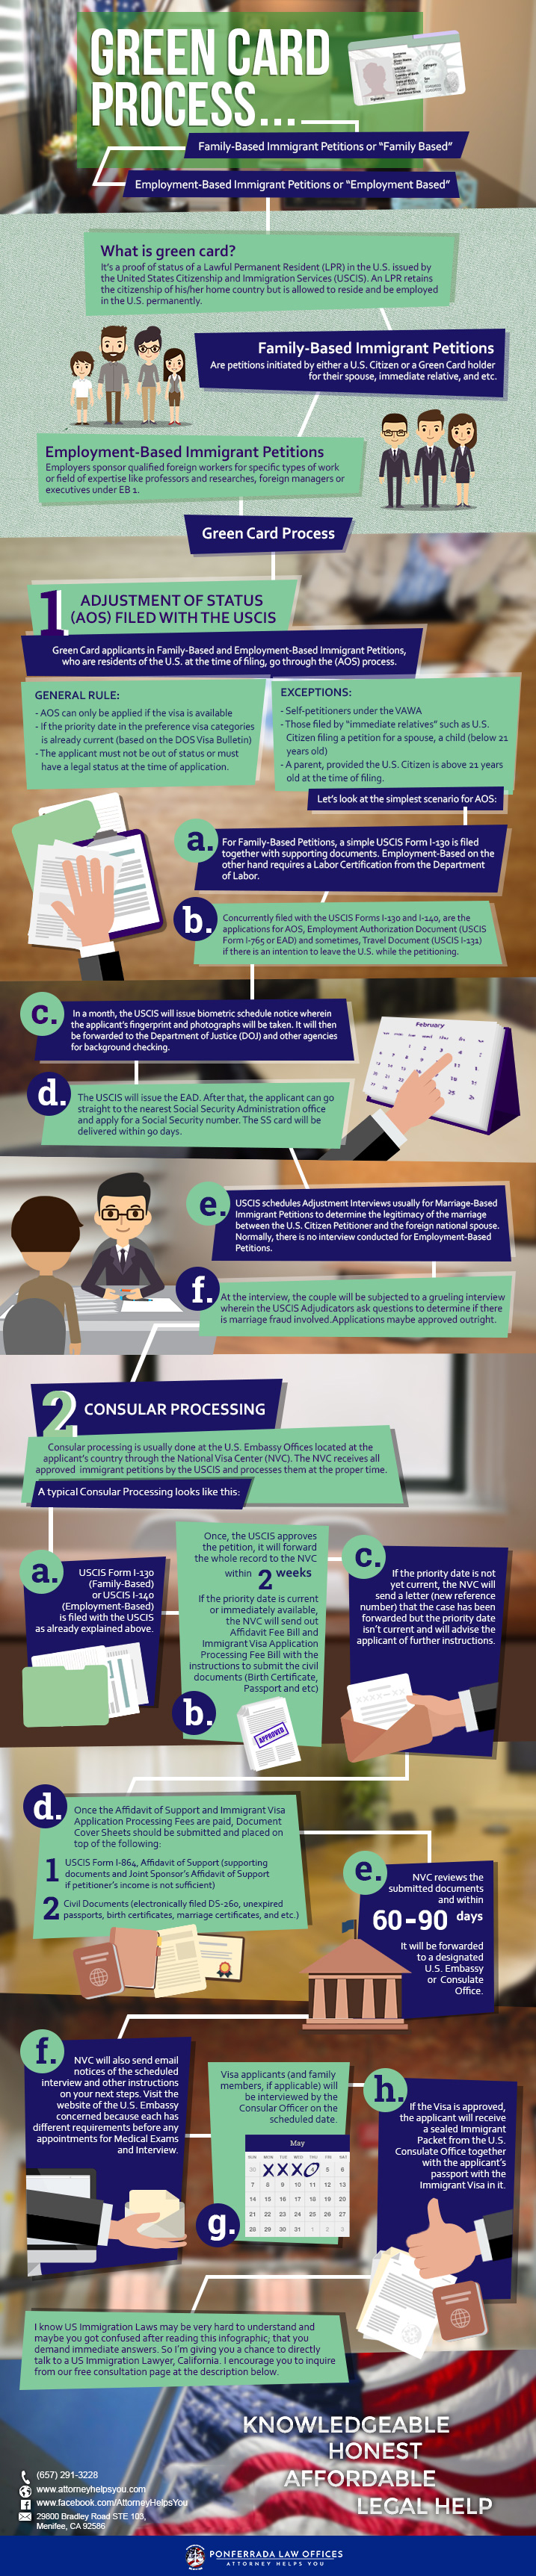 green-card-process-infographic